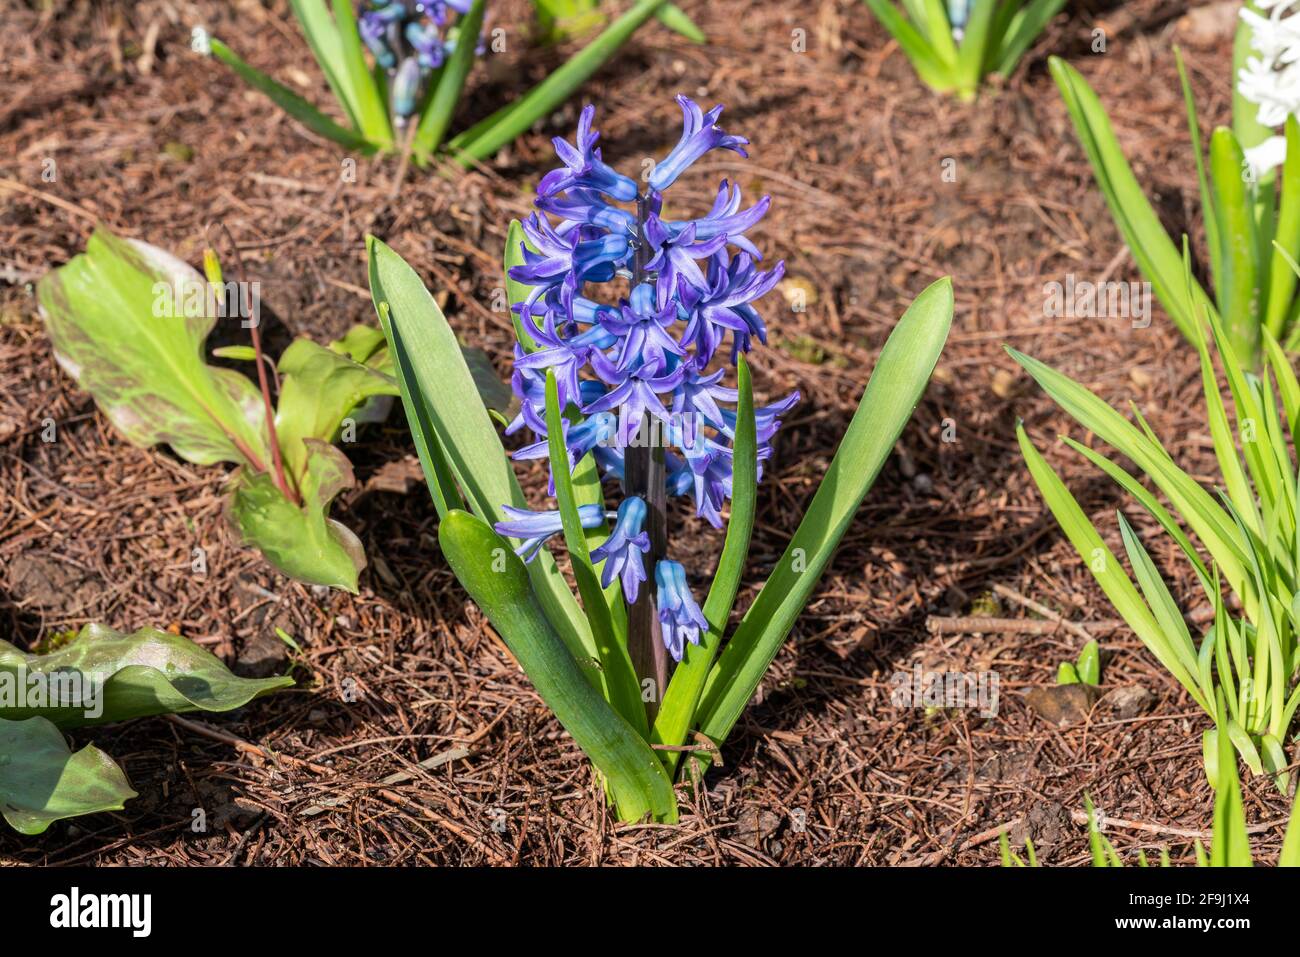 Hyacinth (Hyacinthus orientalis) 'Aida' a spring flowering bulbous plant with a blue springtime flower spike in March, stock photo image Stock Photo